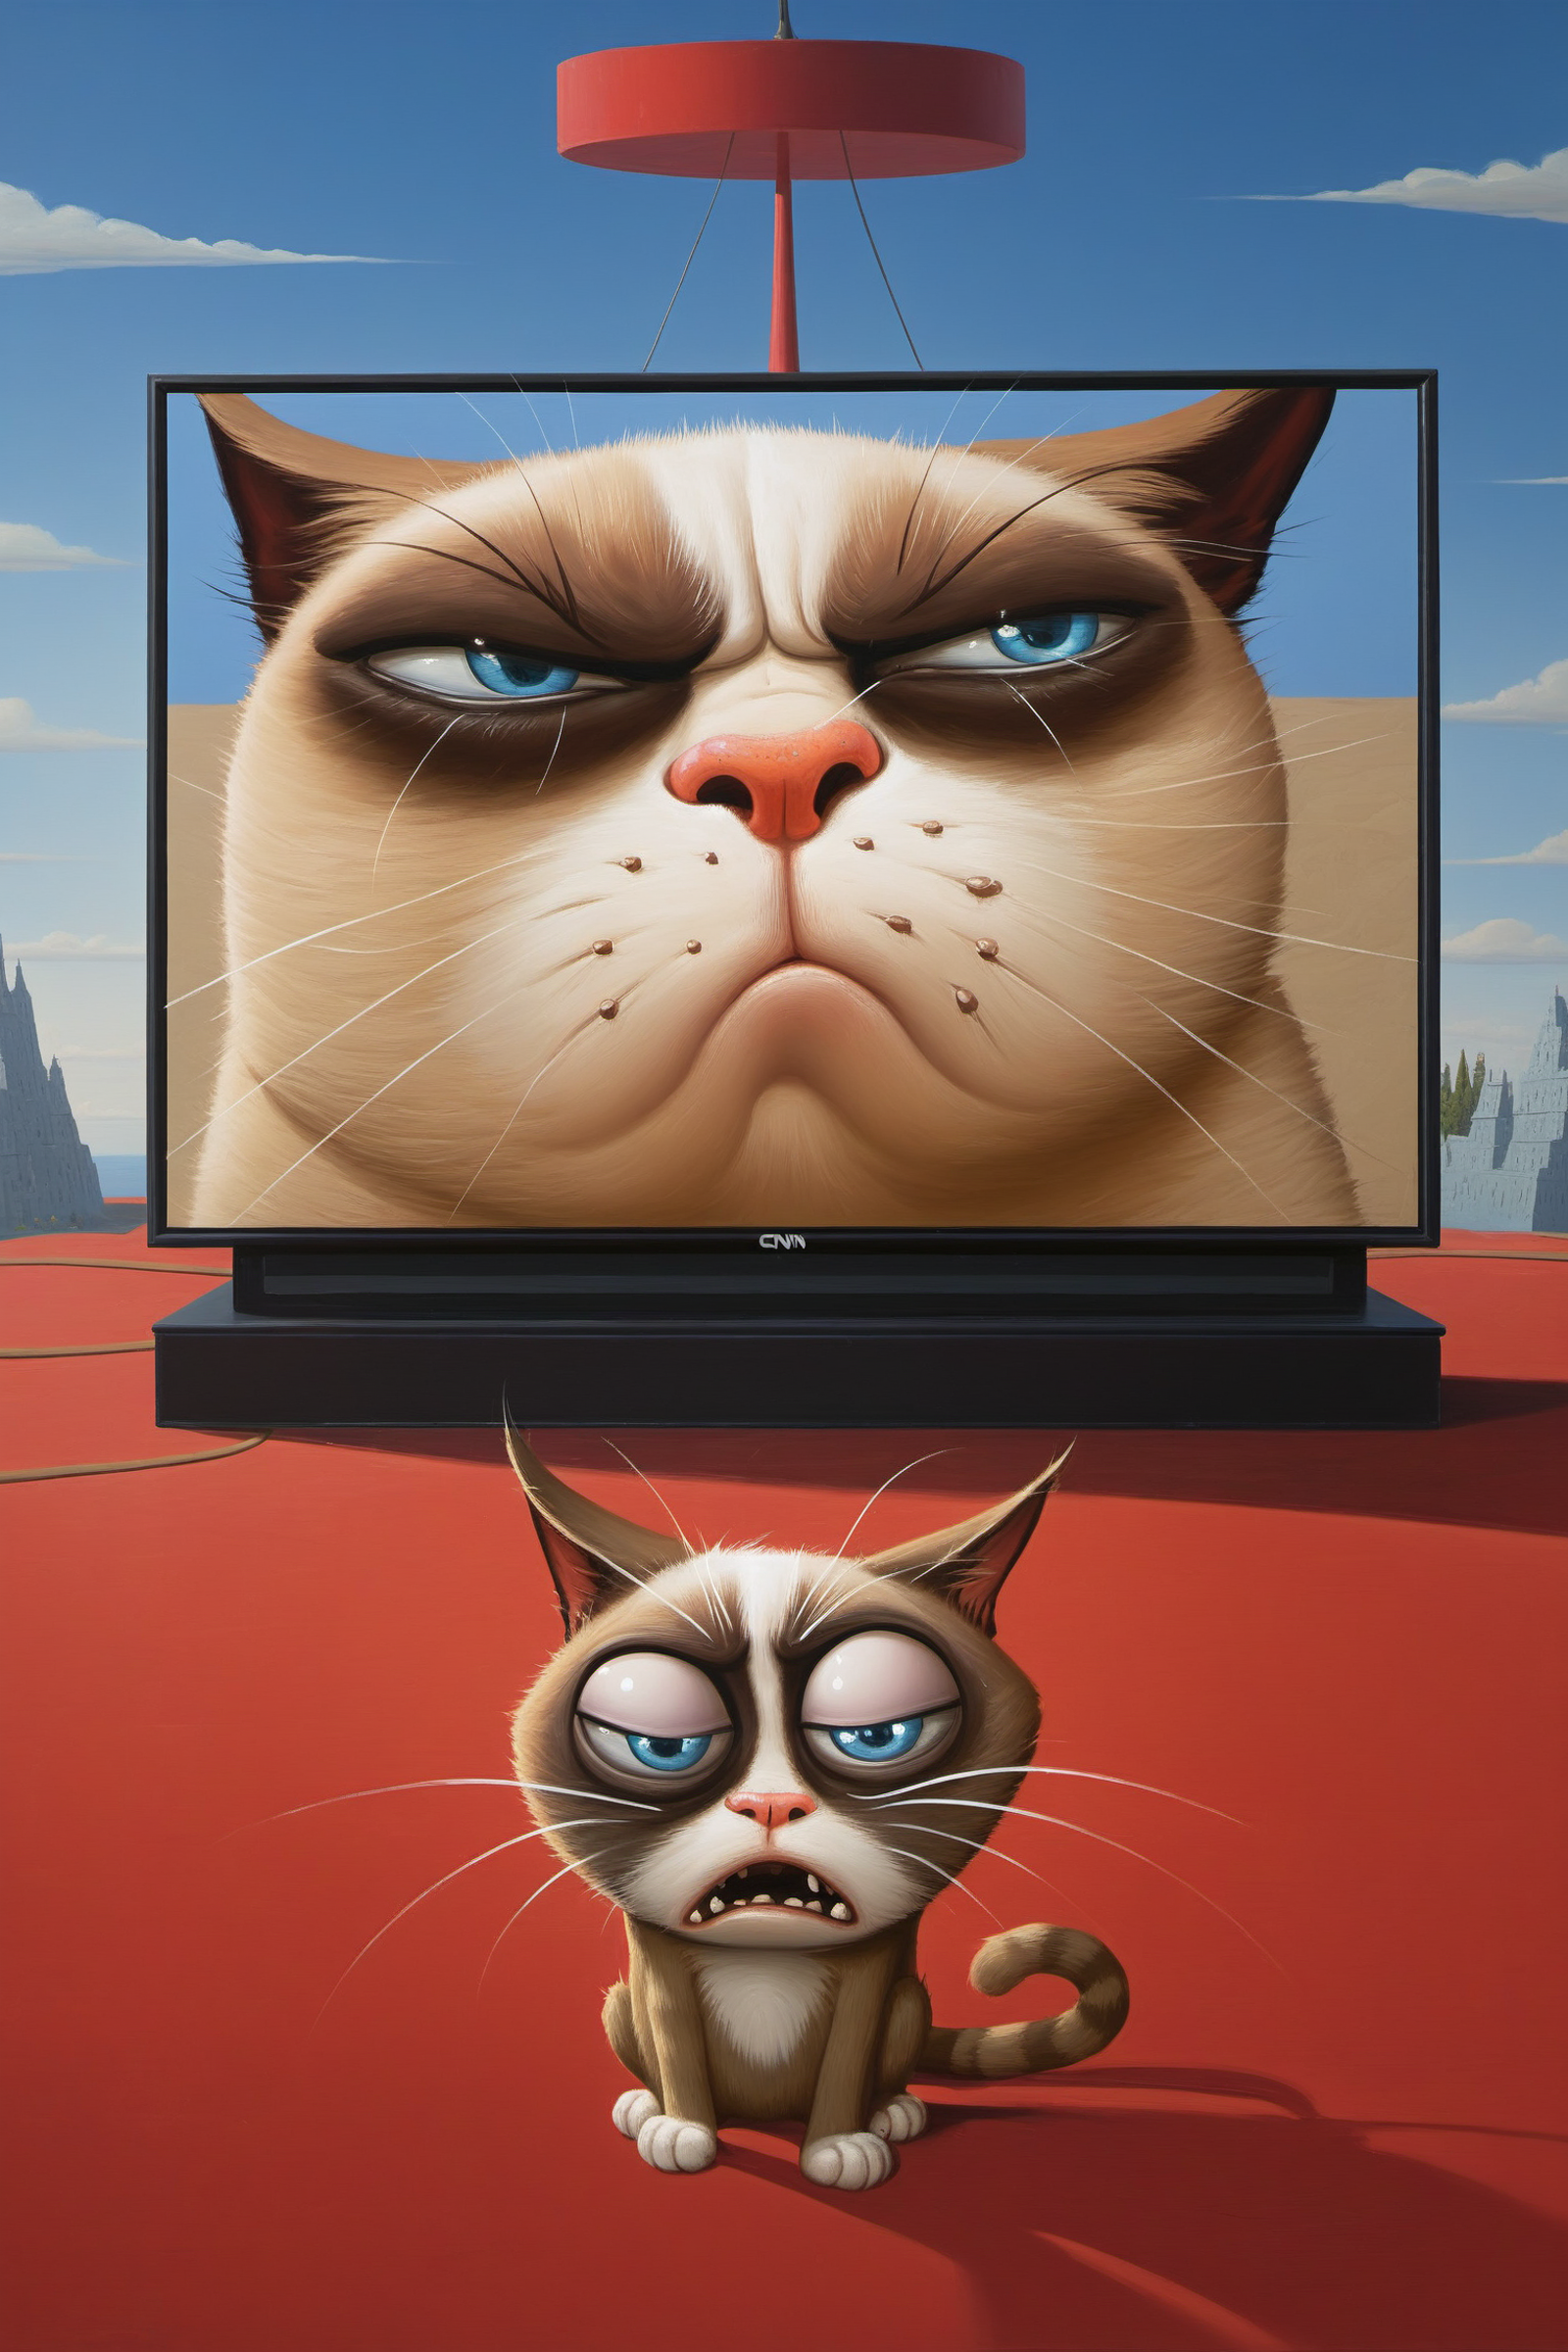 A cartoon cat is sitting in front of a Dell monitor with a cat on the screen.